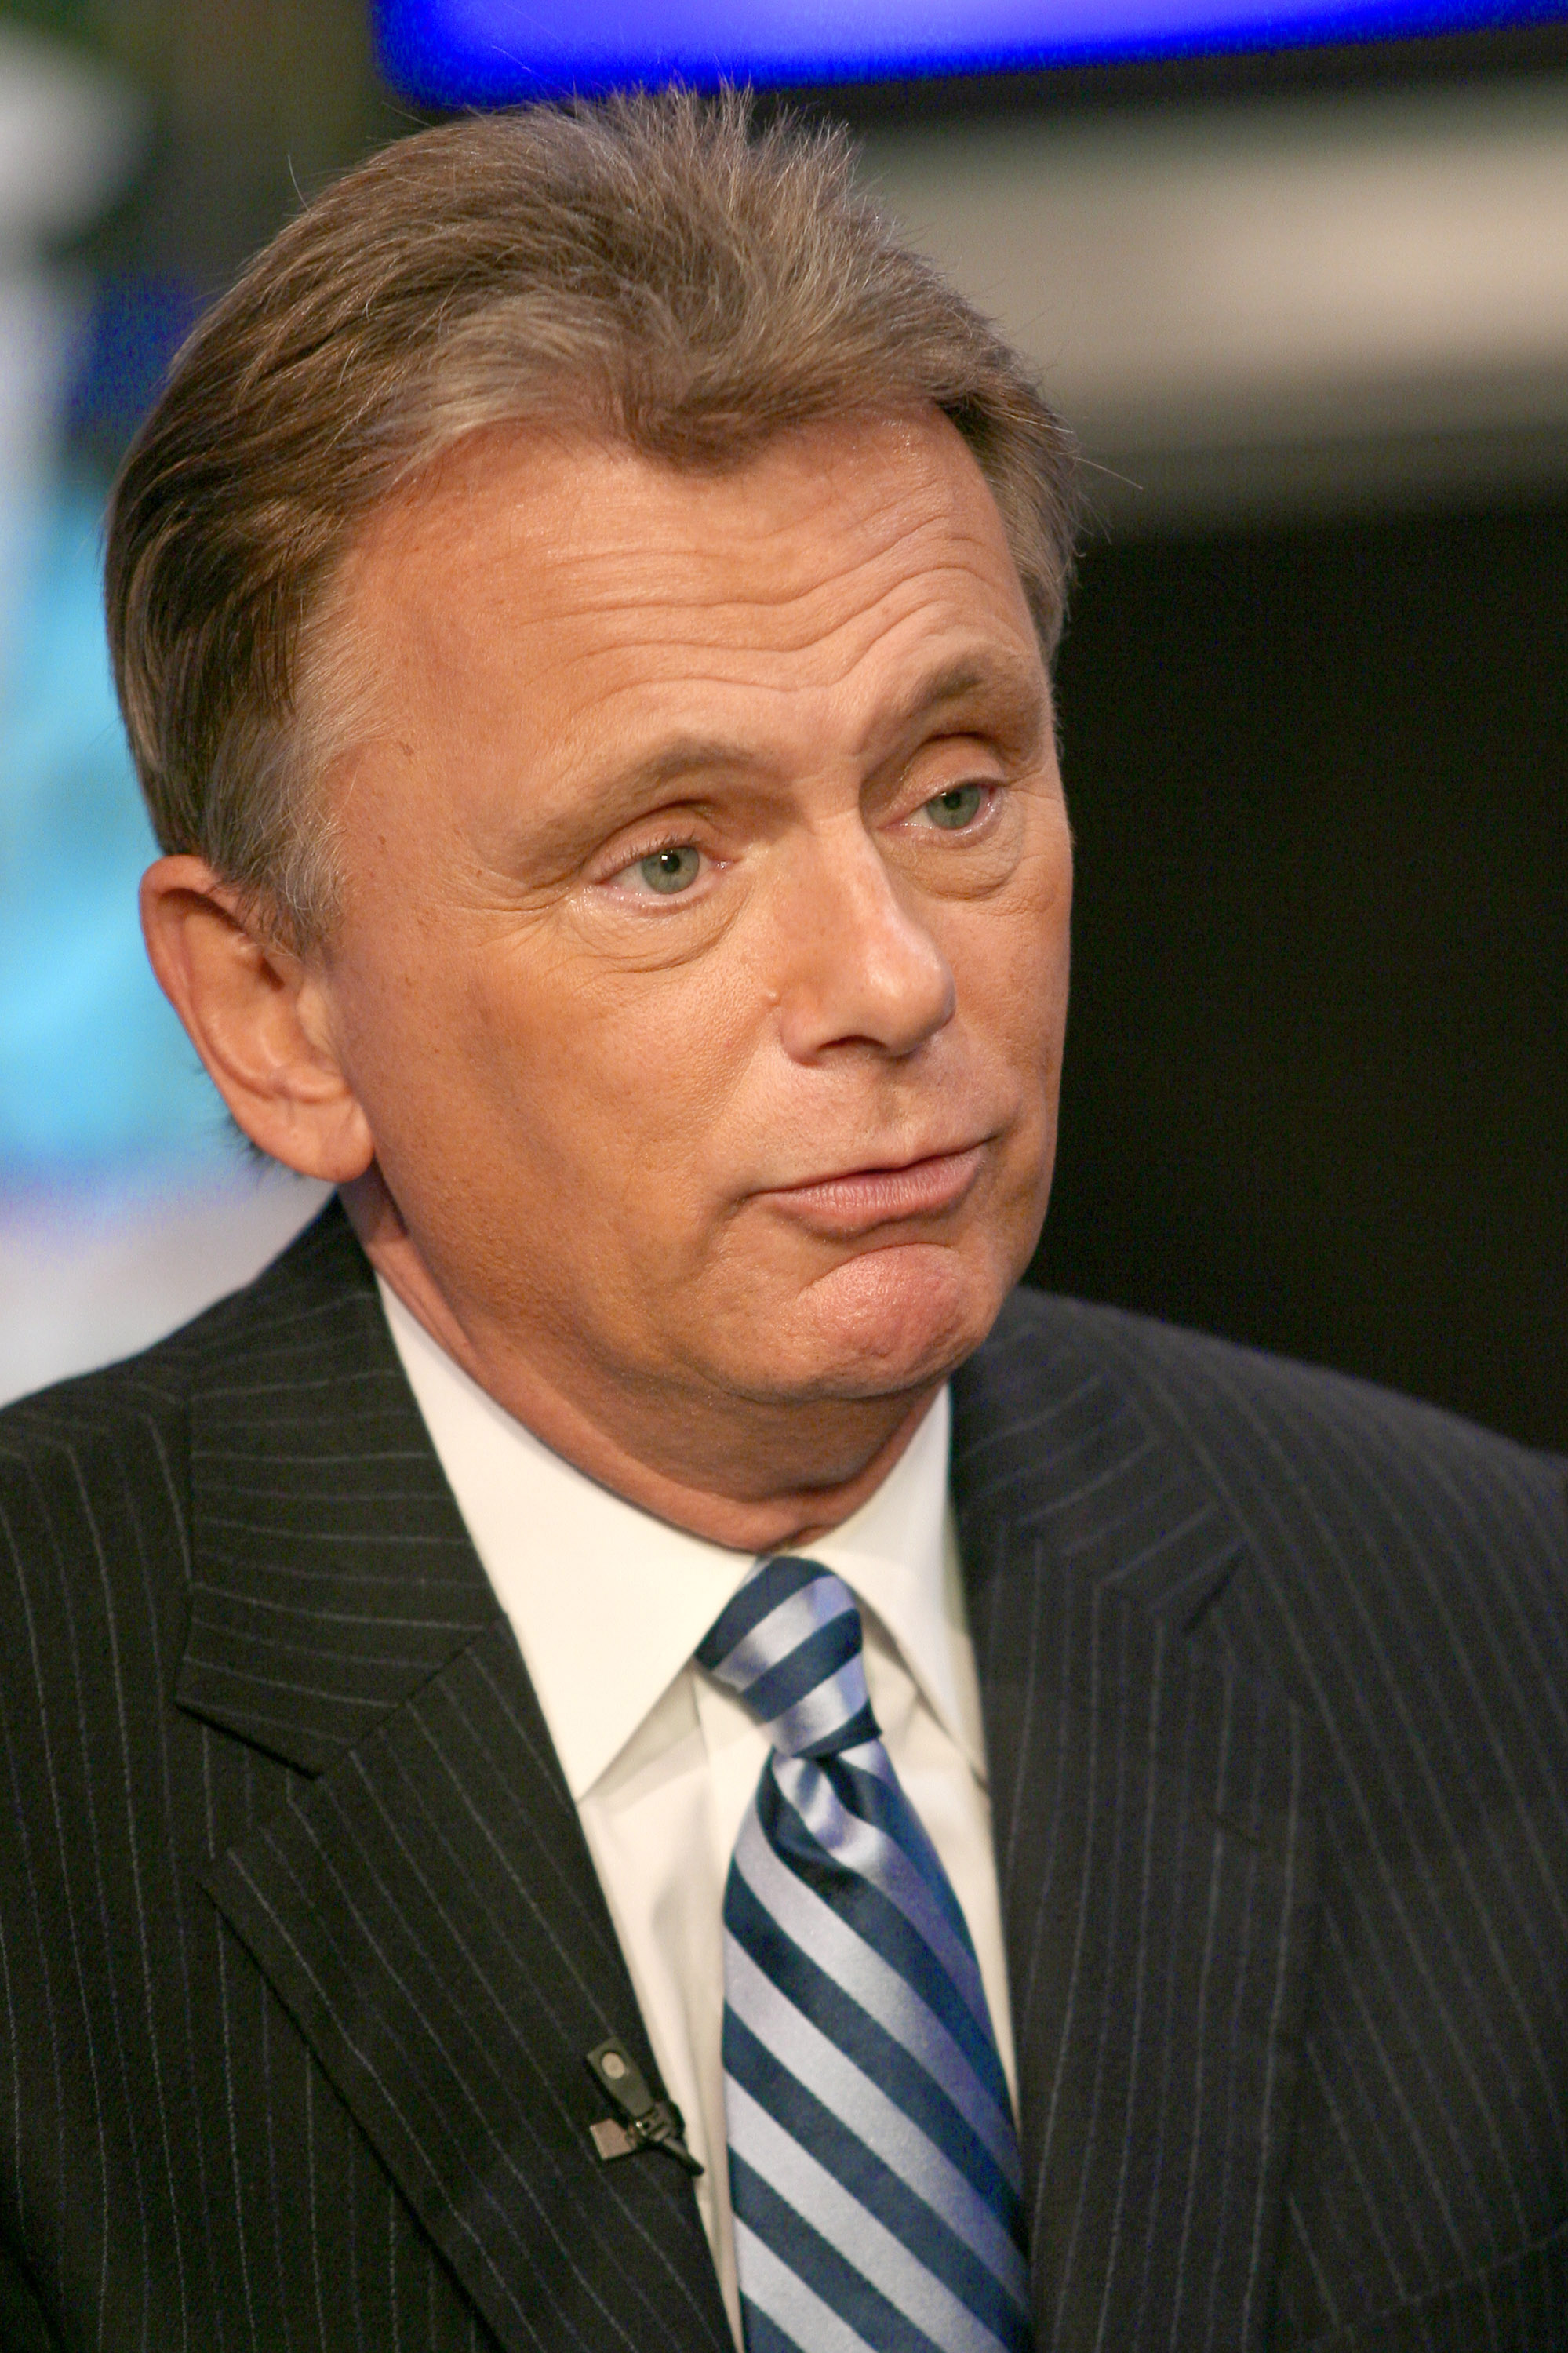 Pat Sajak on September 12, 2006, in Culver City, California | Source: Getty Images